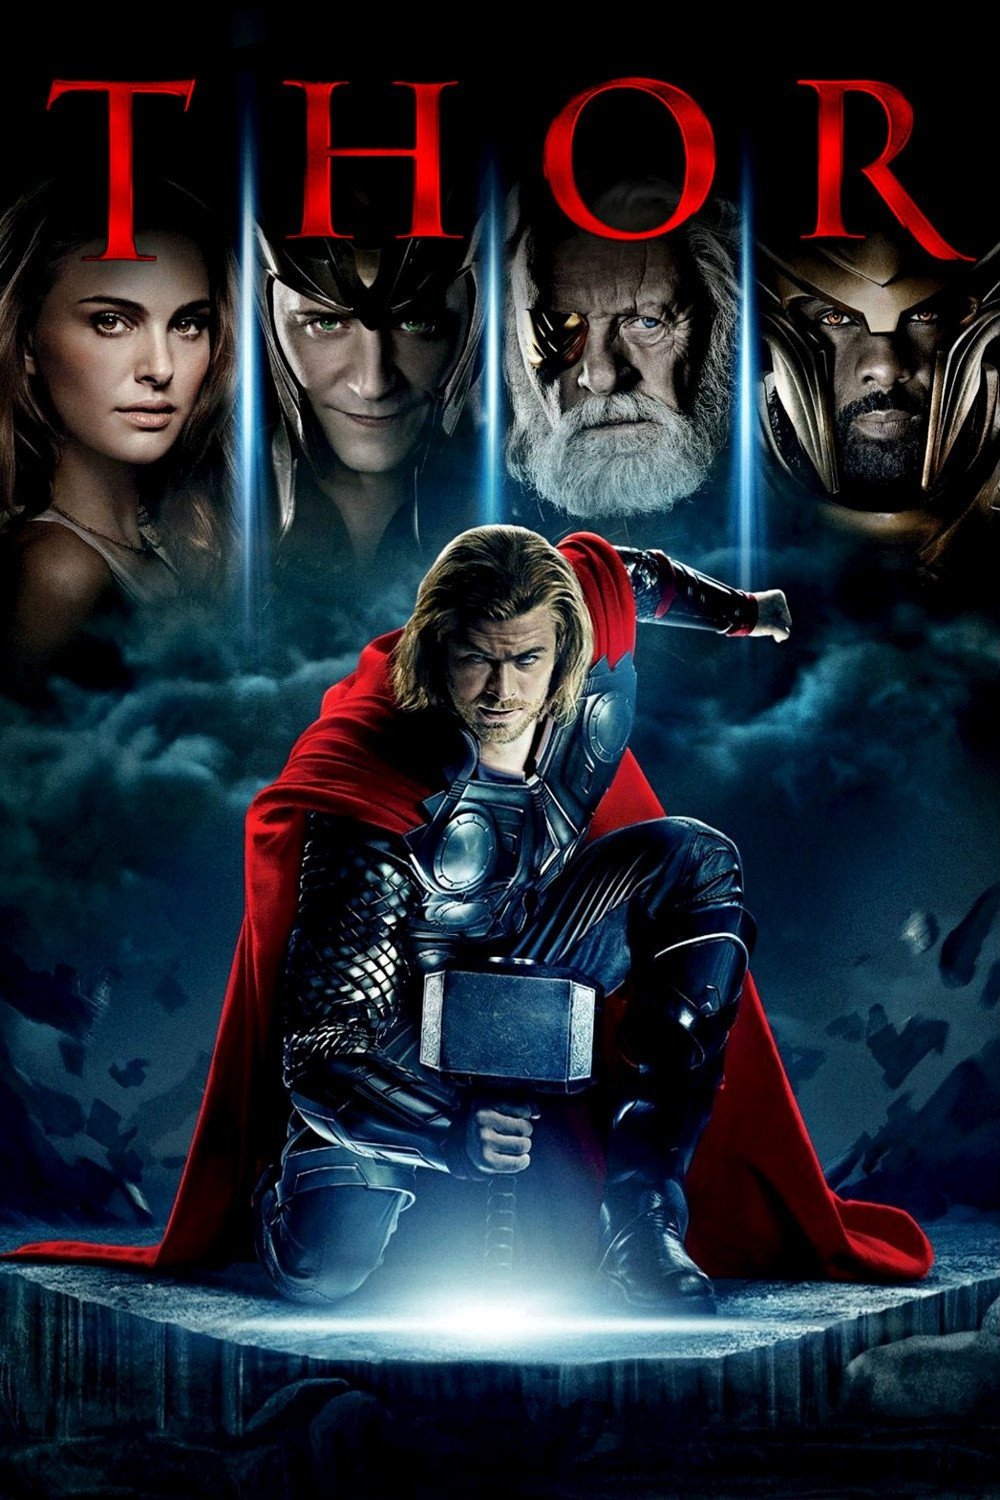 Thor Movie Poster - ID: 127264 - Image Abyss